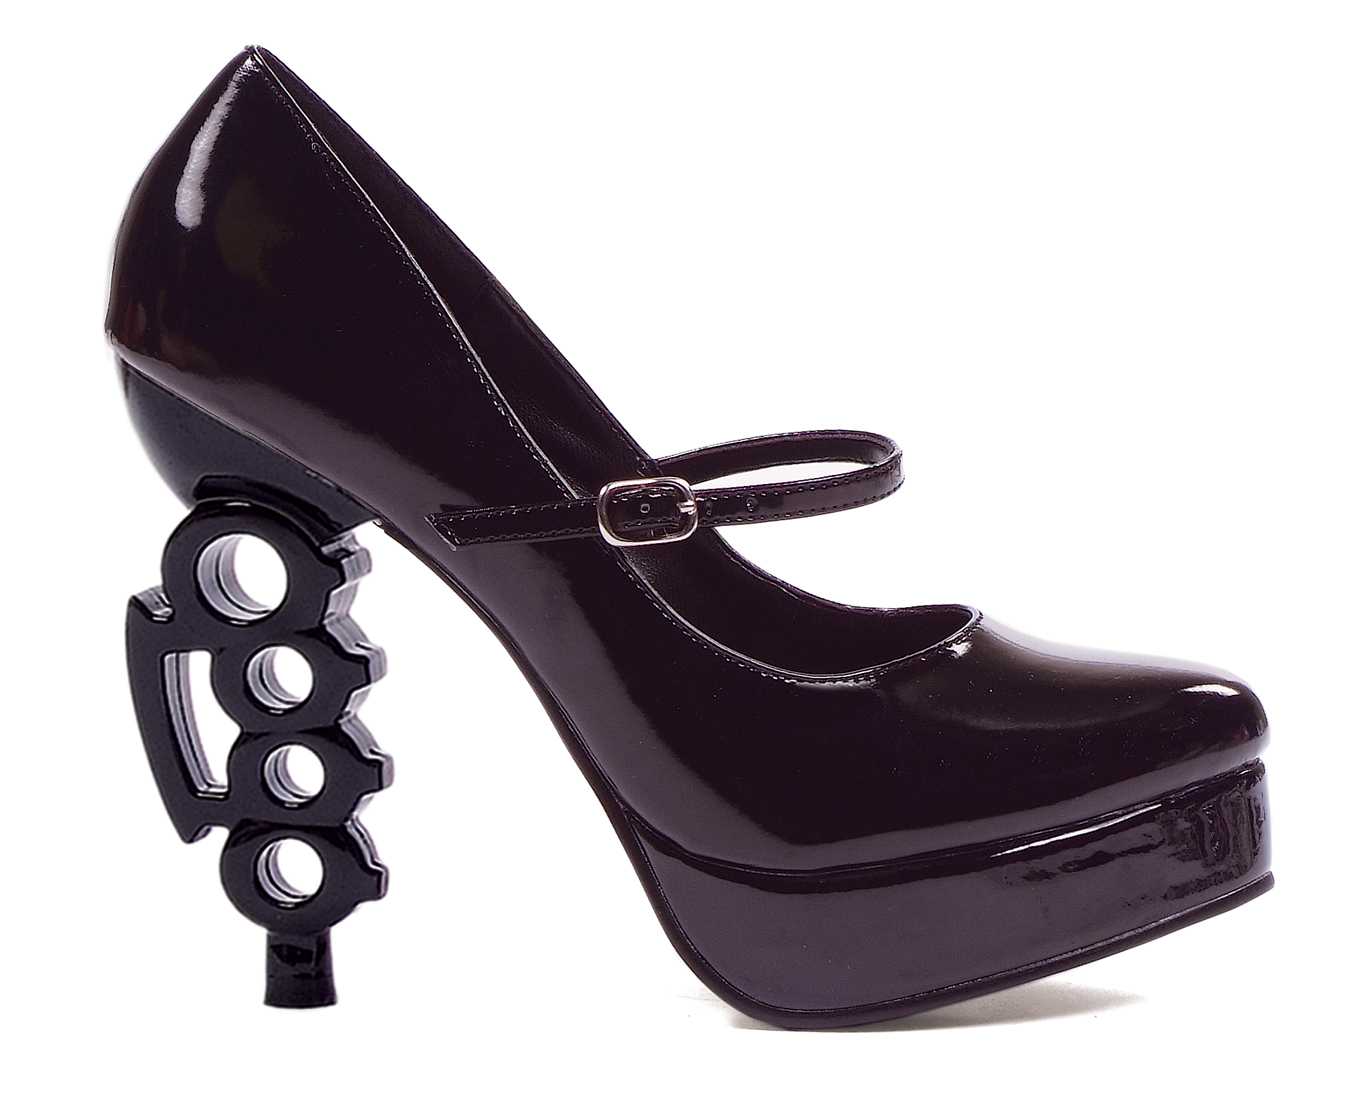 Fugitive - 5 Inch Patent Pump with Brass Knuckle Heel